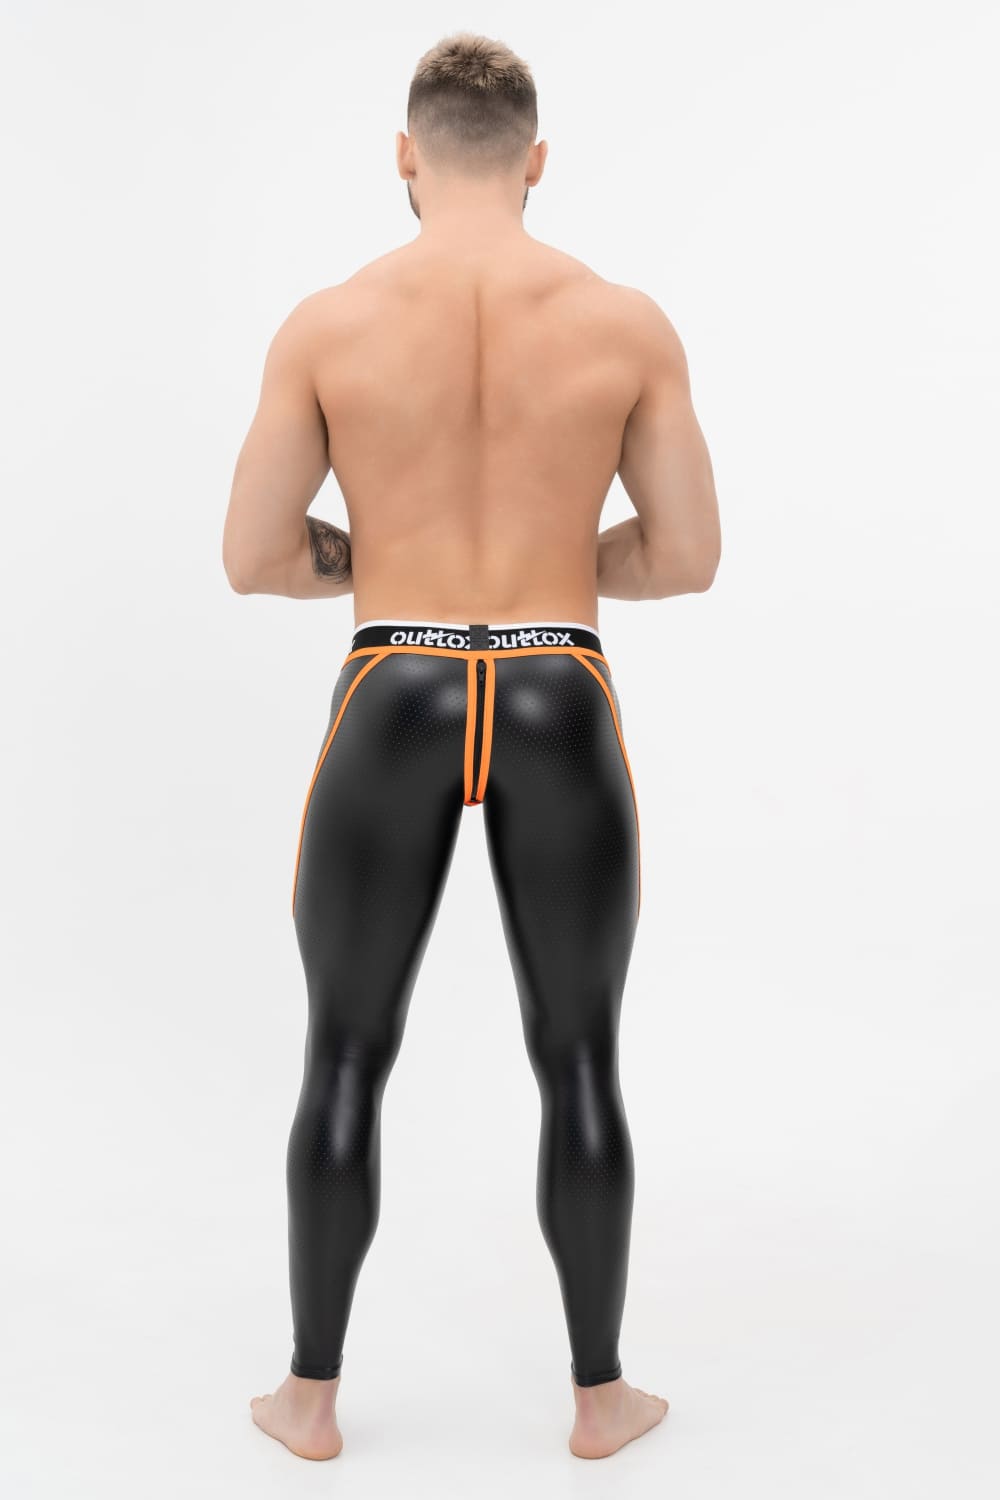 Outtox. Zip-Rear Leggings with Snap Codpiece. Black+Orange